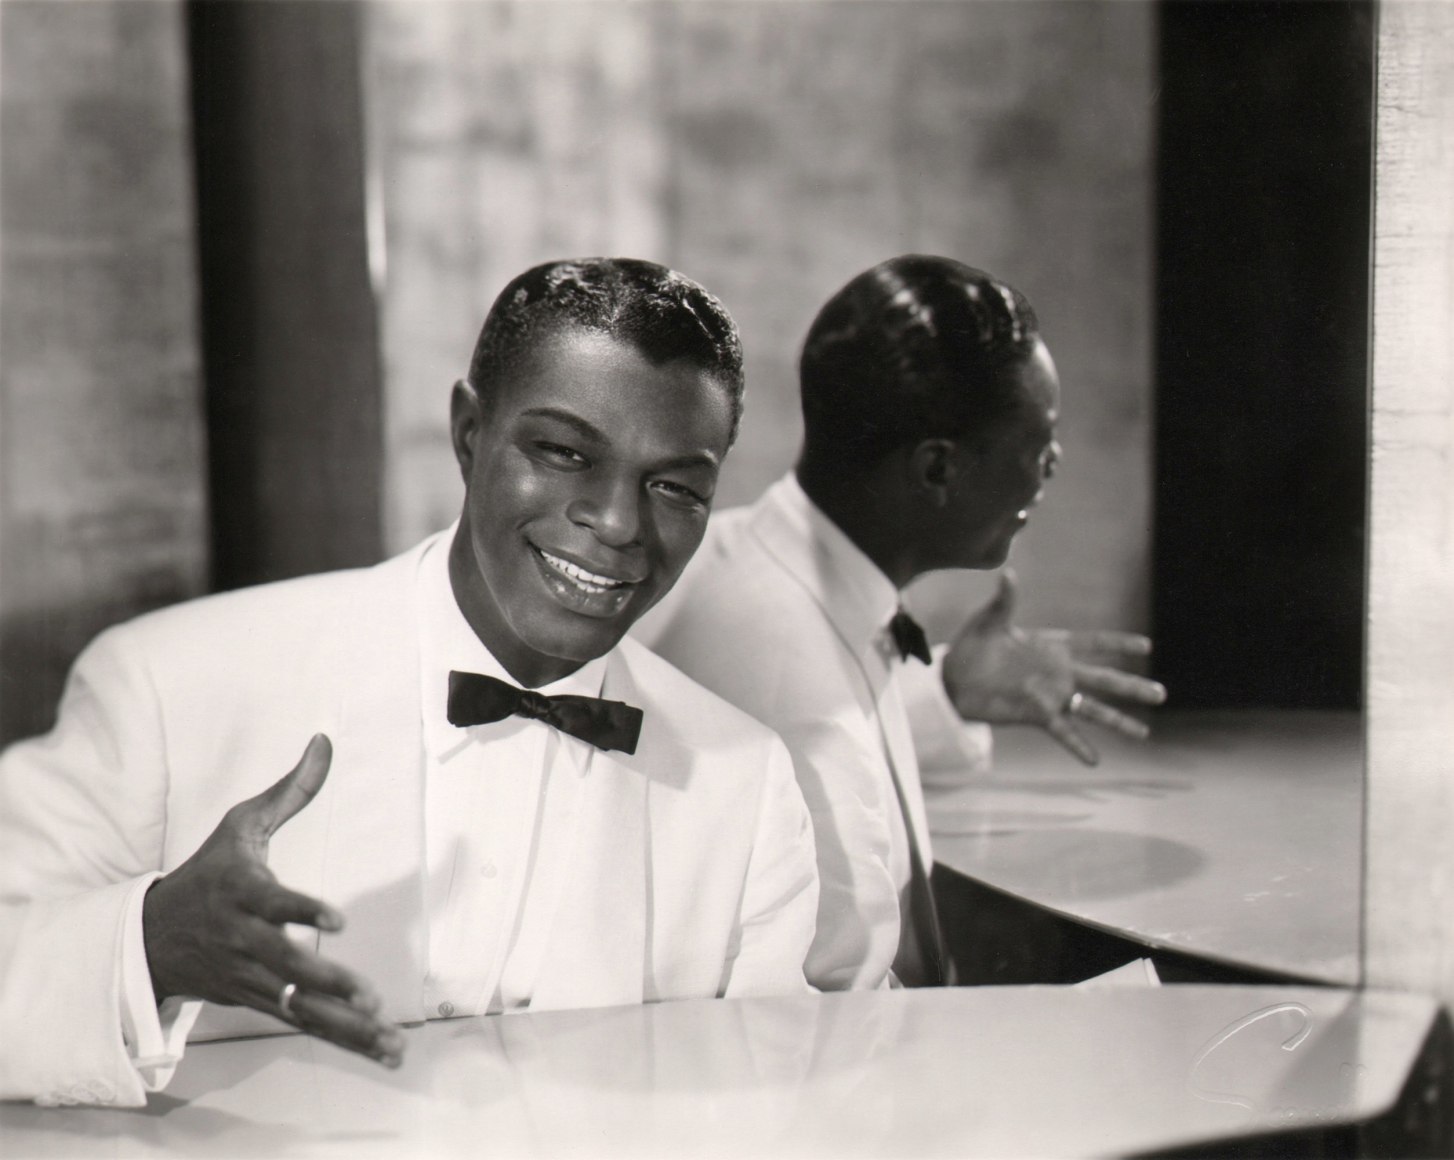 Wallace Seawell, Nat King Cole, ​c. 1955. Subject is seated in a white suit at the piano in front of a mirror, gesturing and smiling towards the camera.